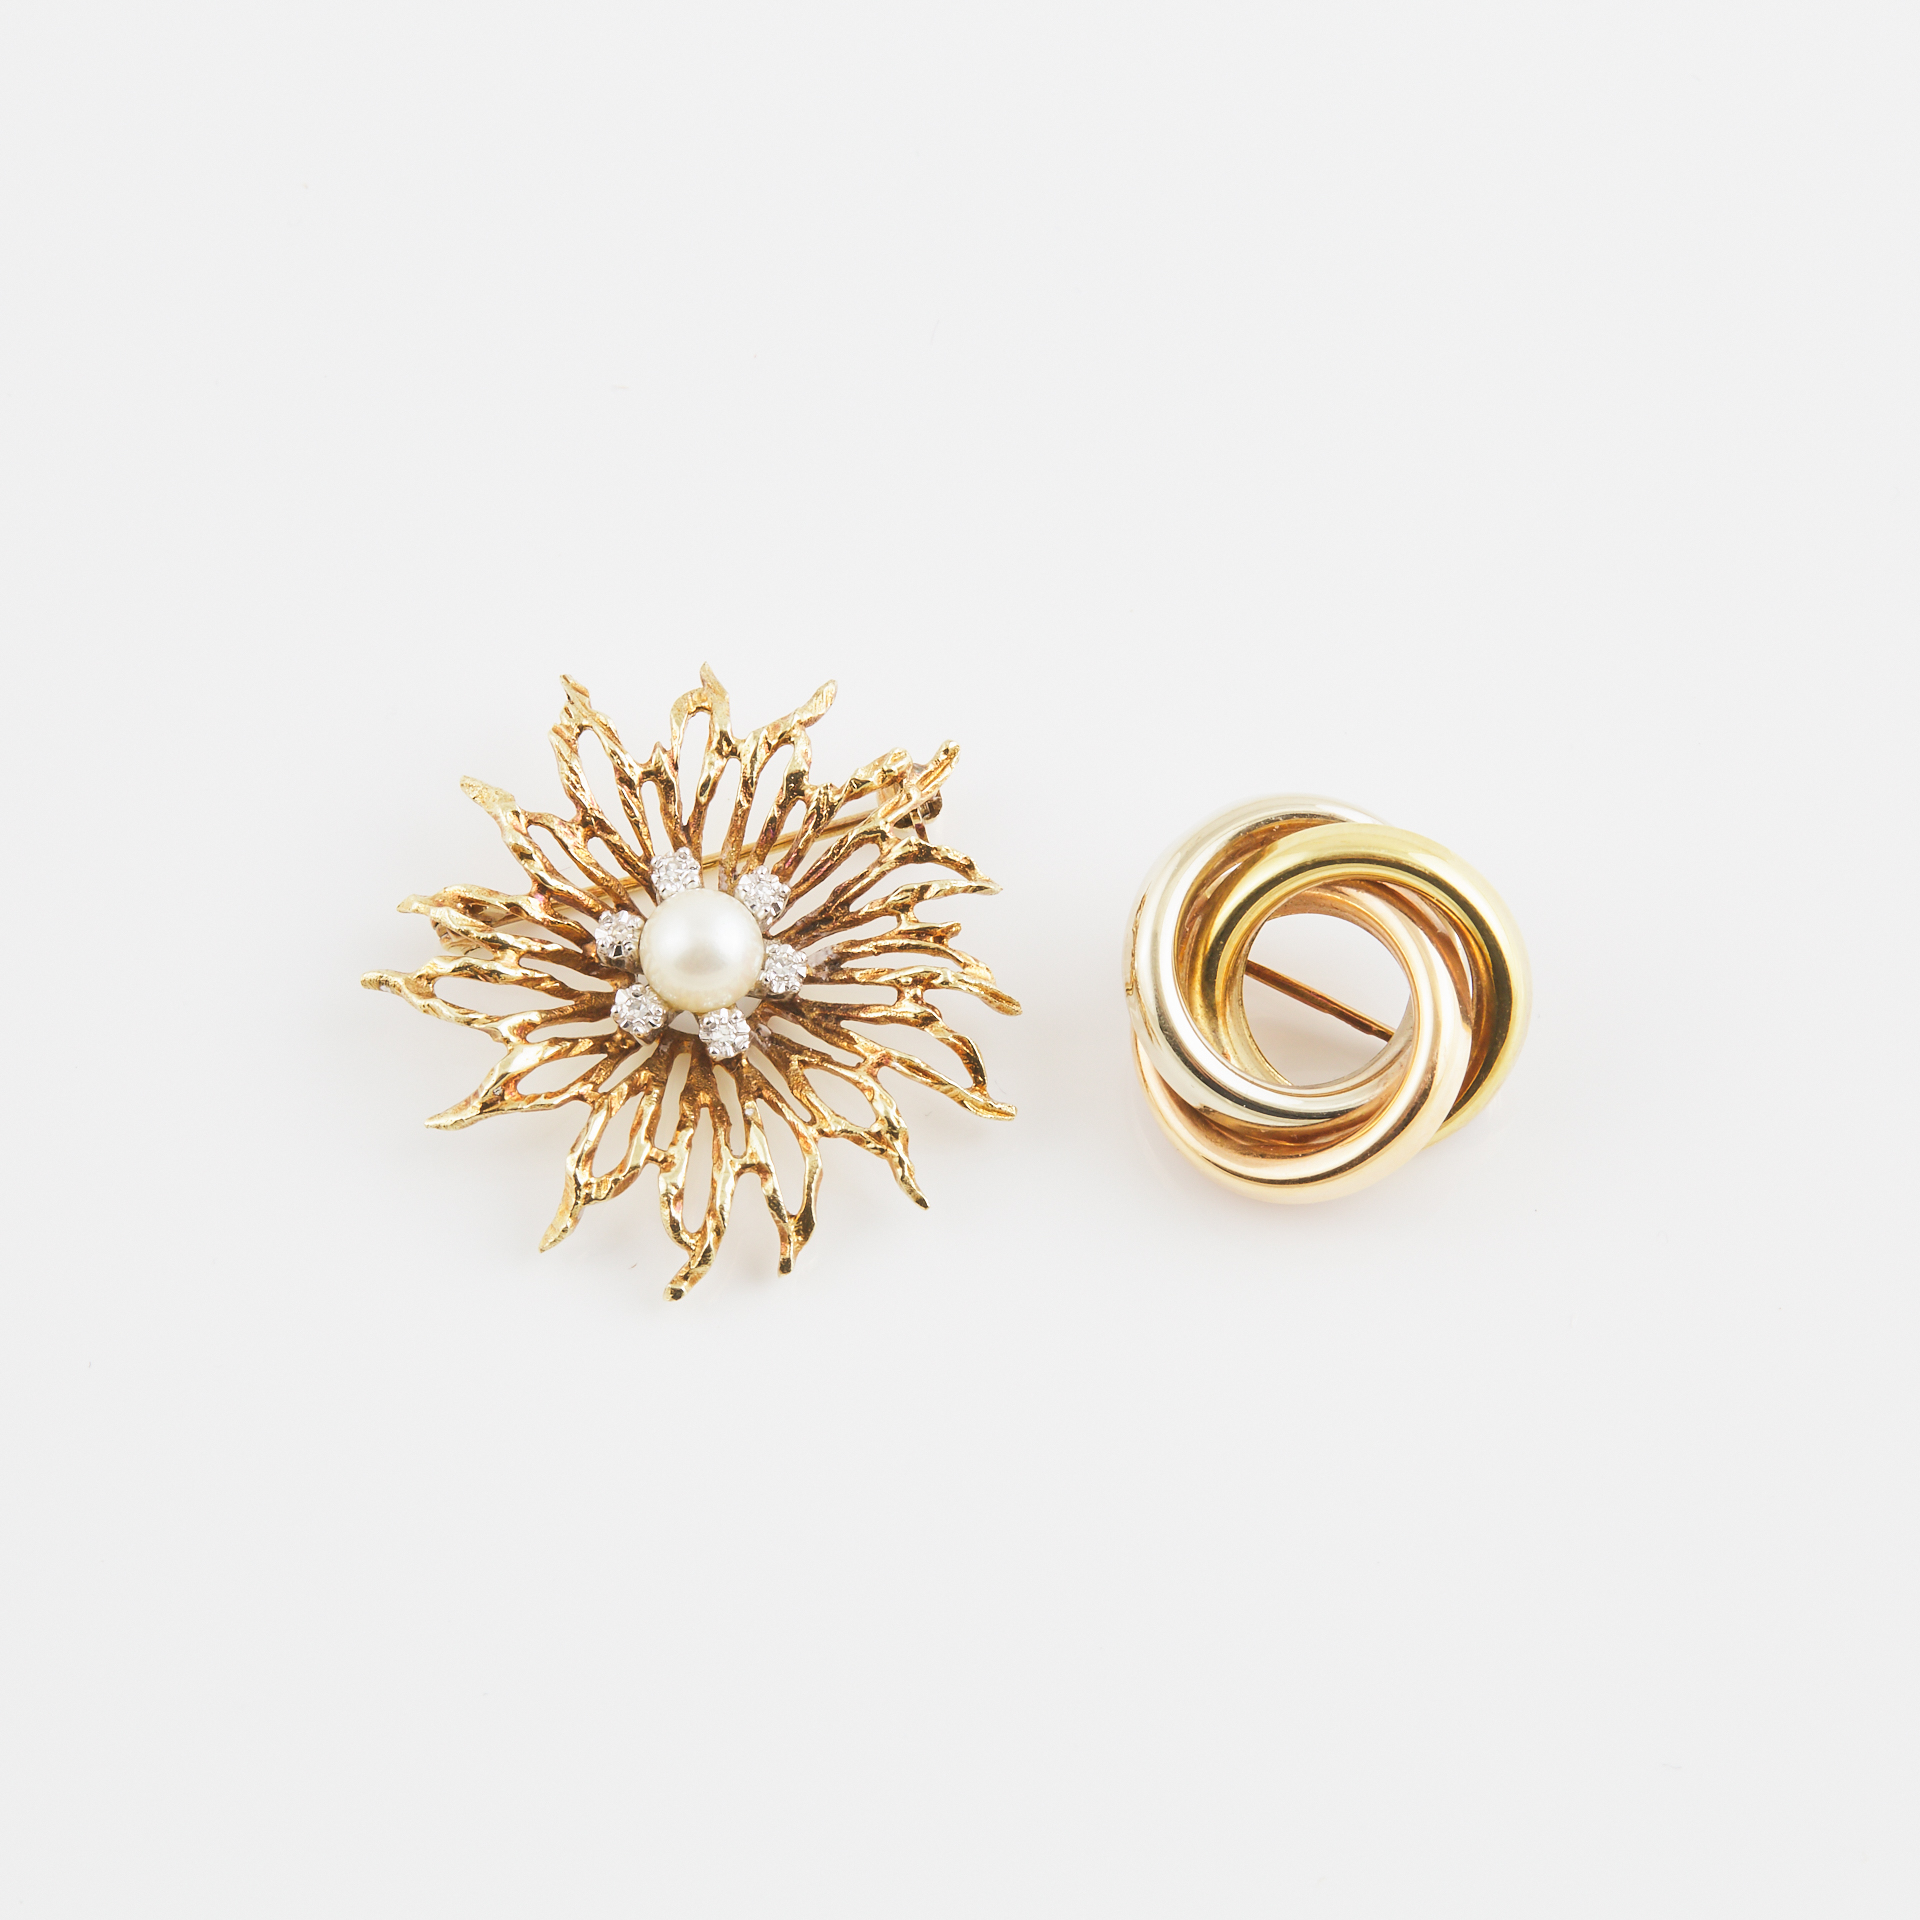 Birks 14k Yellow Gold Brooch And A 14k Tri-Colour Gold Pin